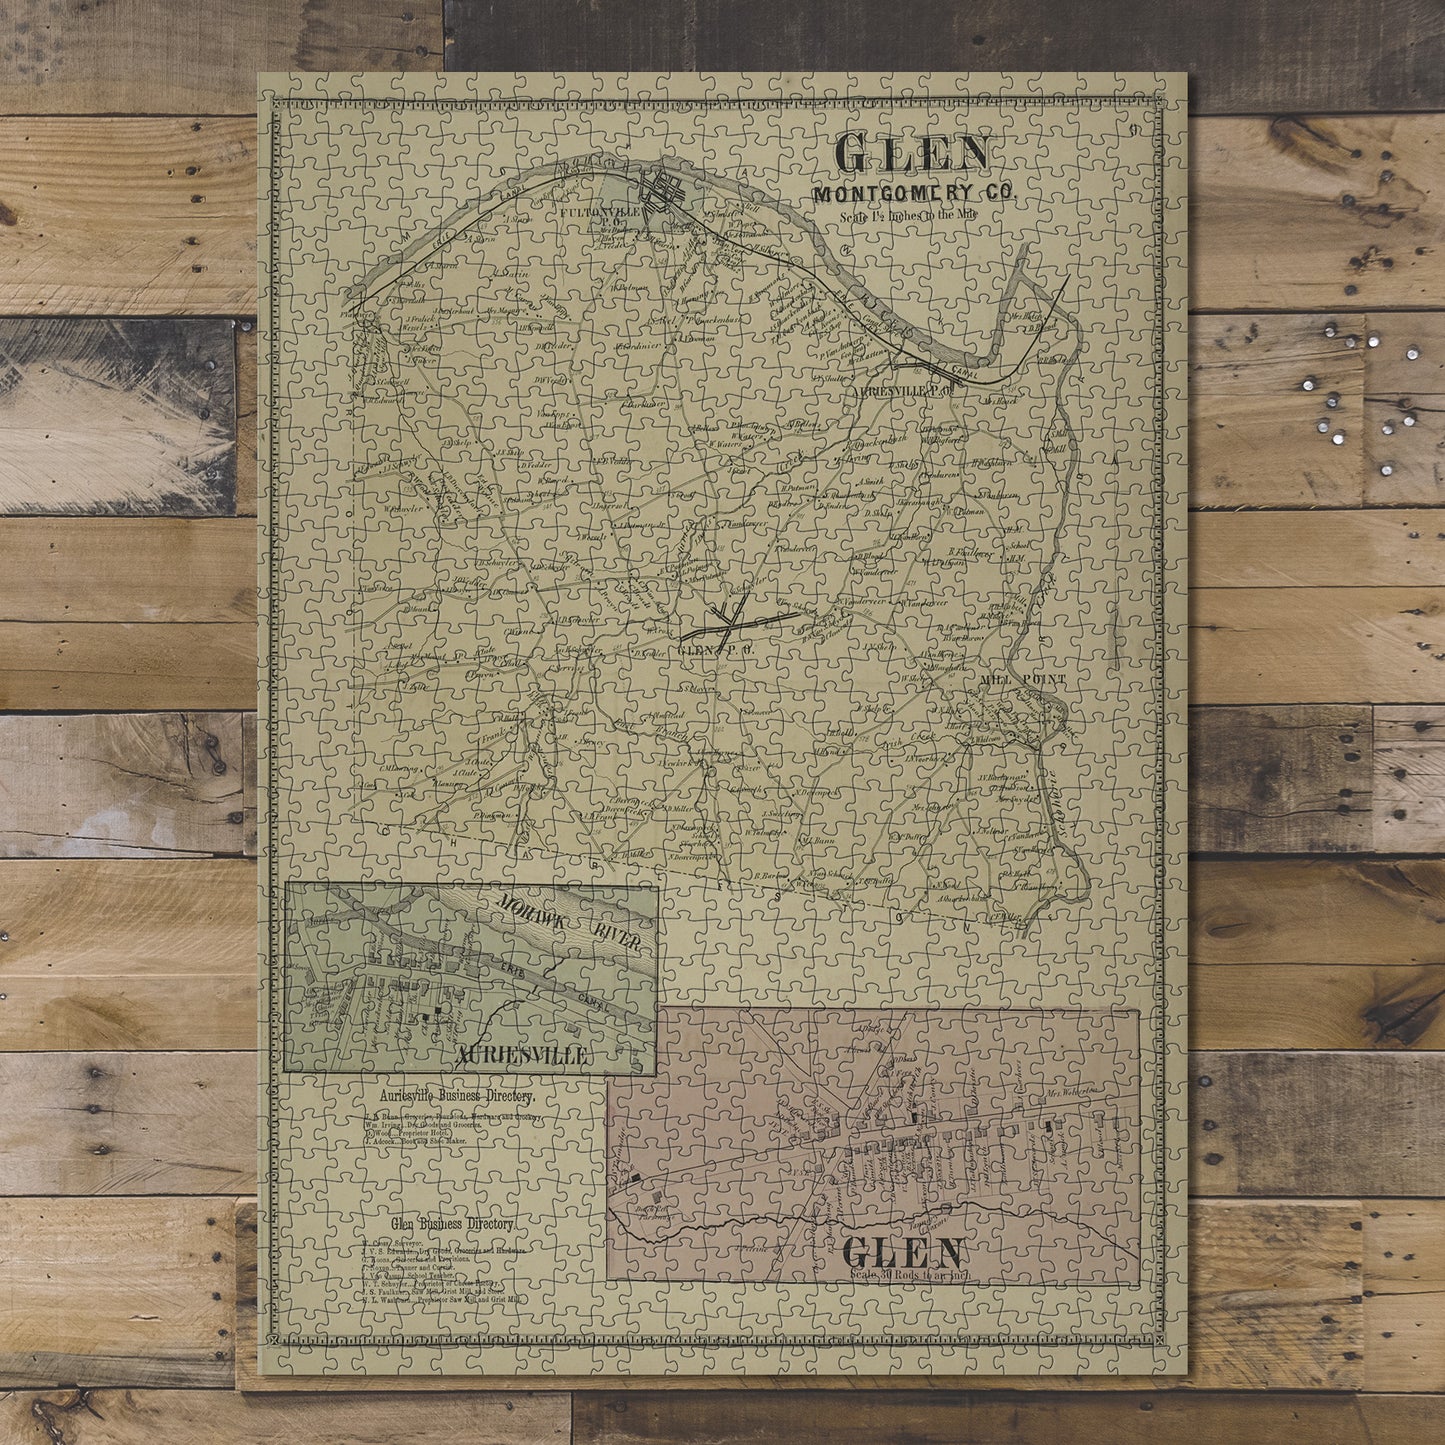 1000 Piece Jigsaw Puzzle 1868 Map of New York Glen Montgomery Co. Townshi; Auriesville